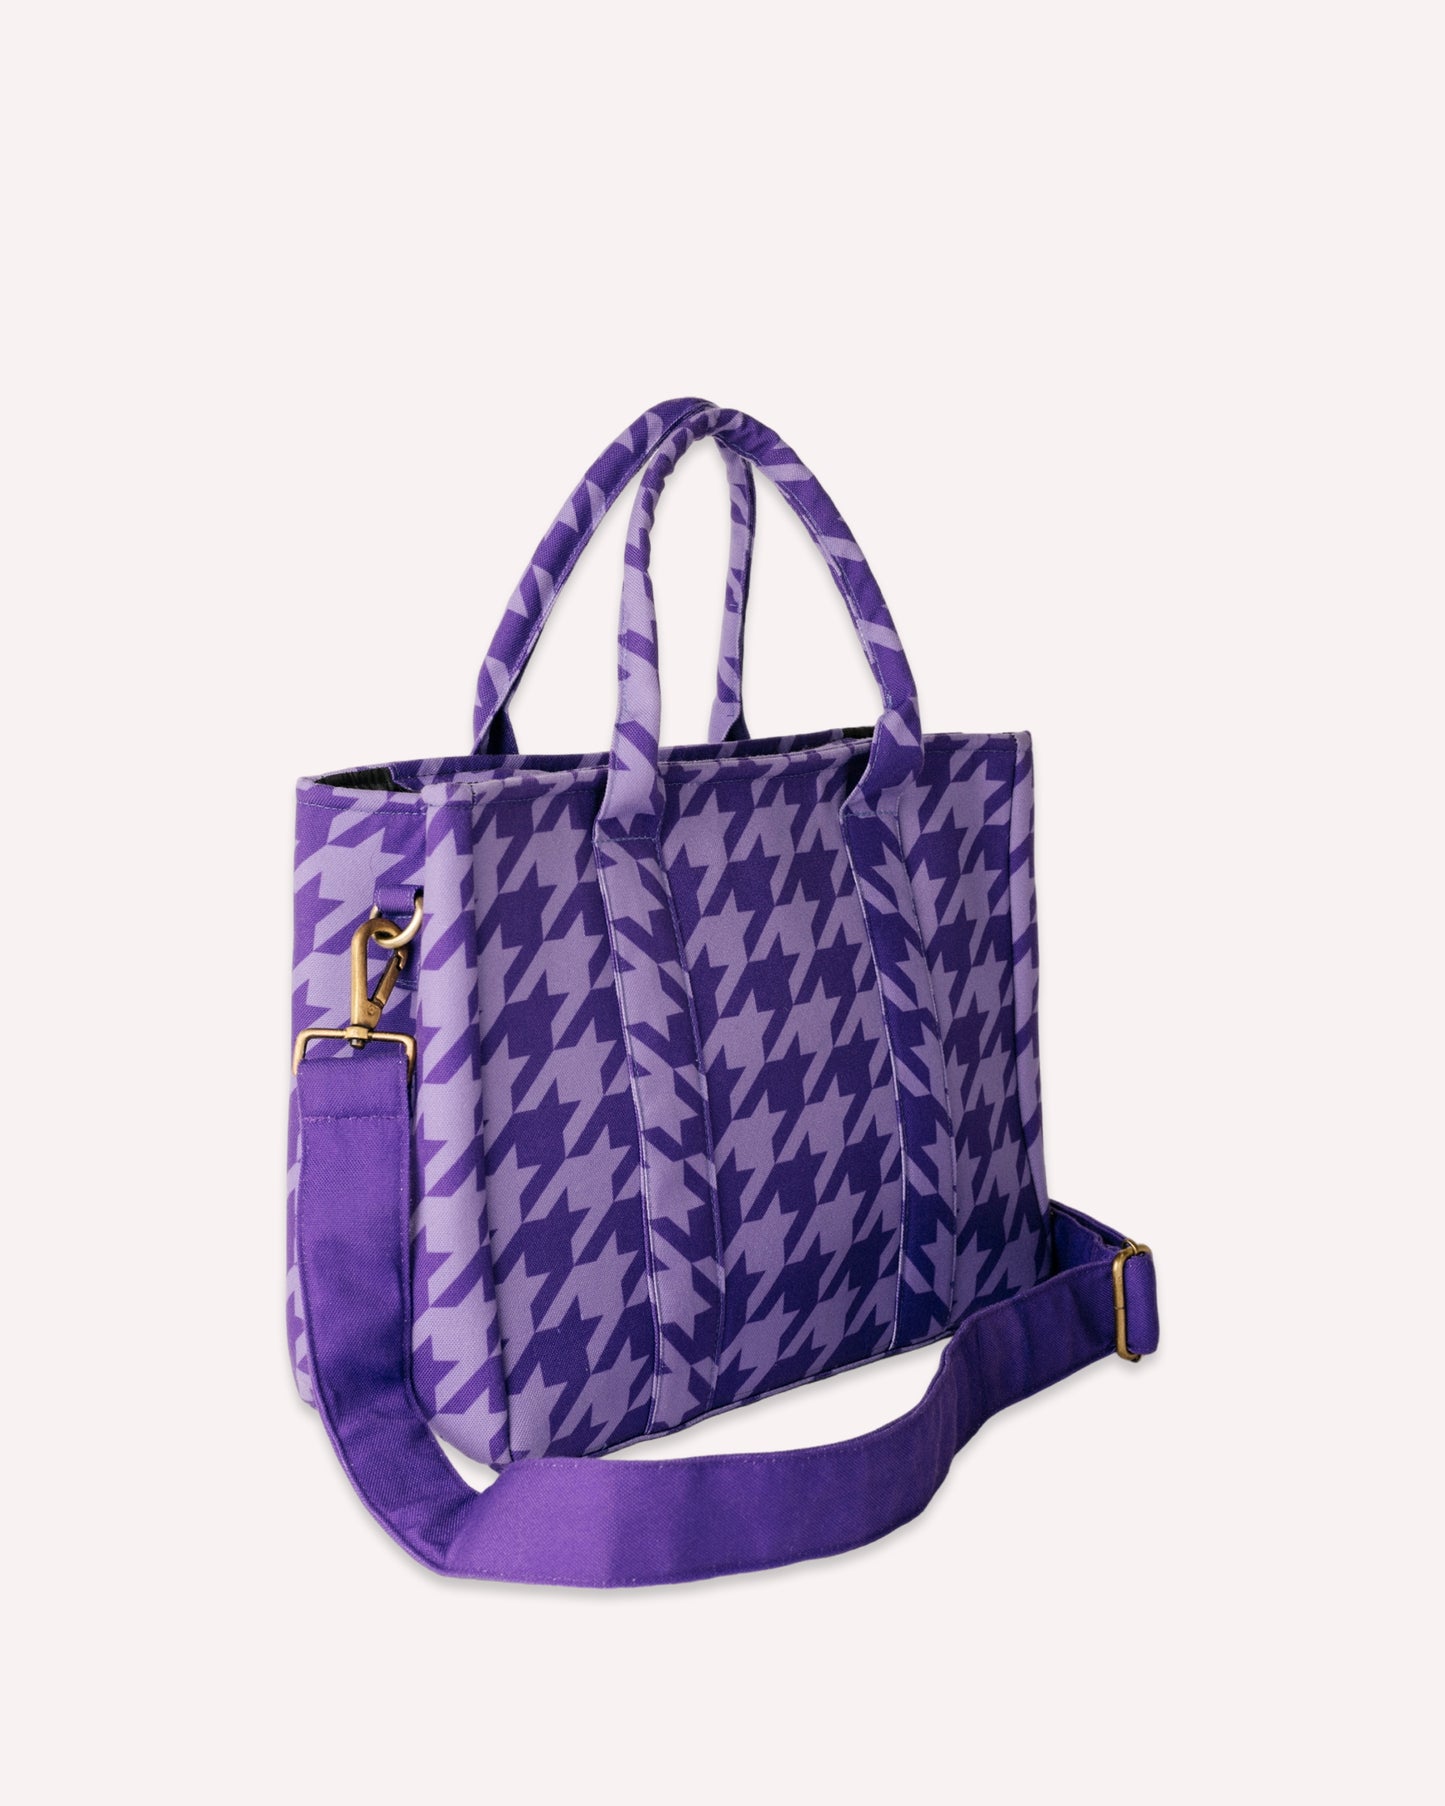 The City Tote Violet